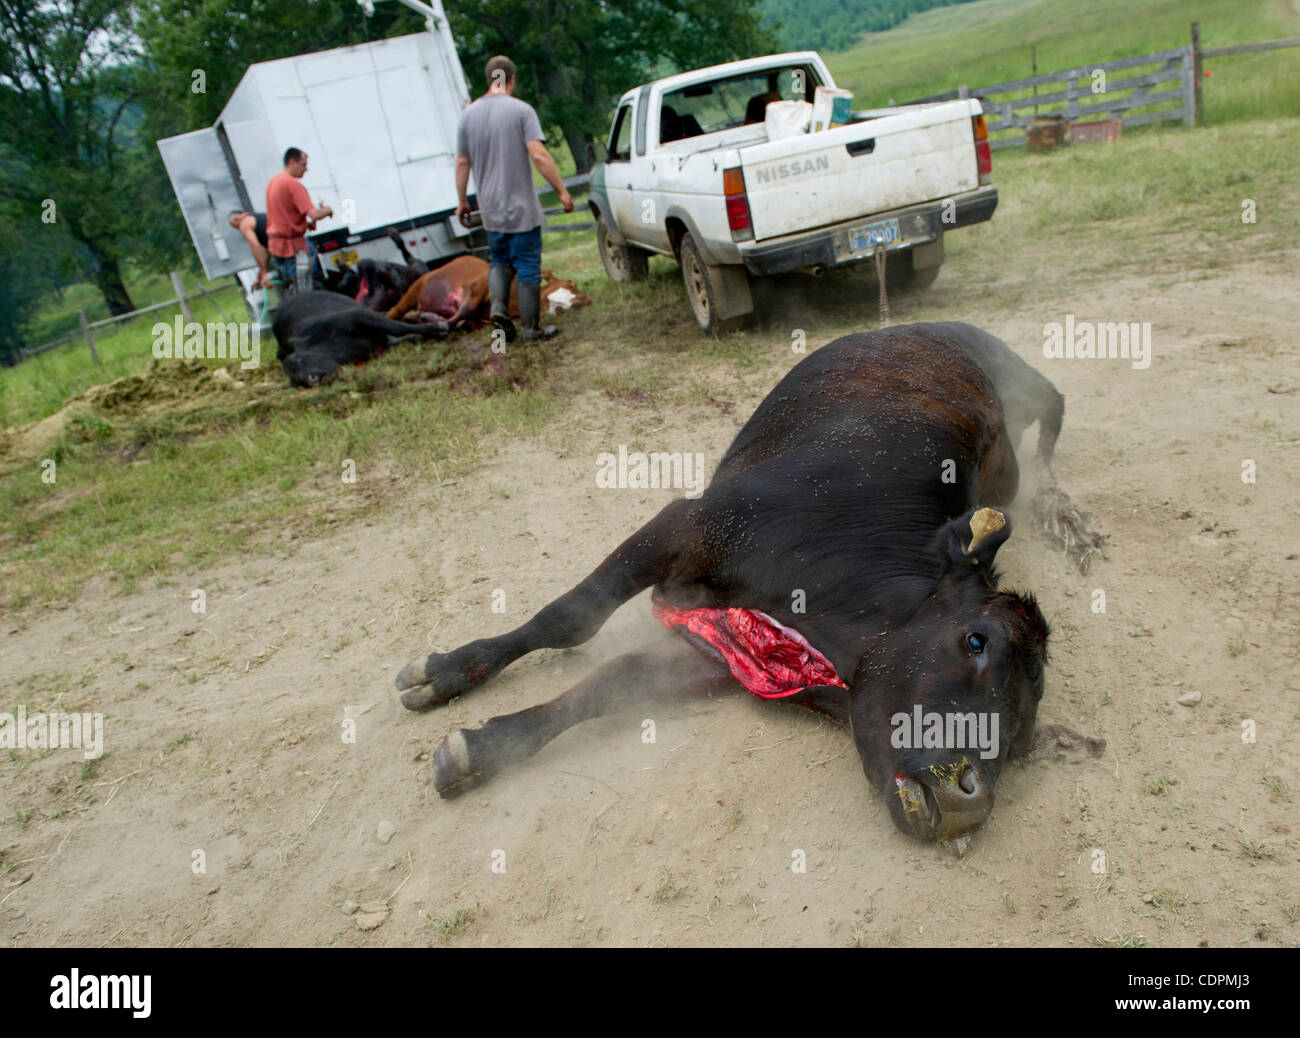 June 22, 2011 - Oakland, Oregon, U.S - Cattle are slaughtered  on a ranch near Oakland. The cattle on the ranch are raised to produce organic, hormone free,  grass-fed beef. According to Nutrition Journal, beef from grass-fed animals has lower levels of unhealthy fats and higher levels of healthy om Stock Photo